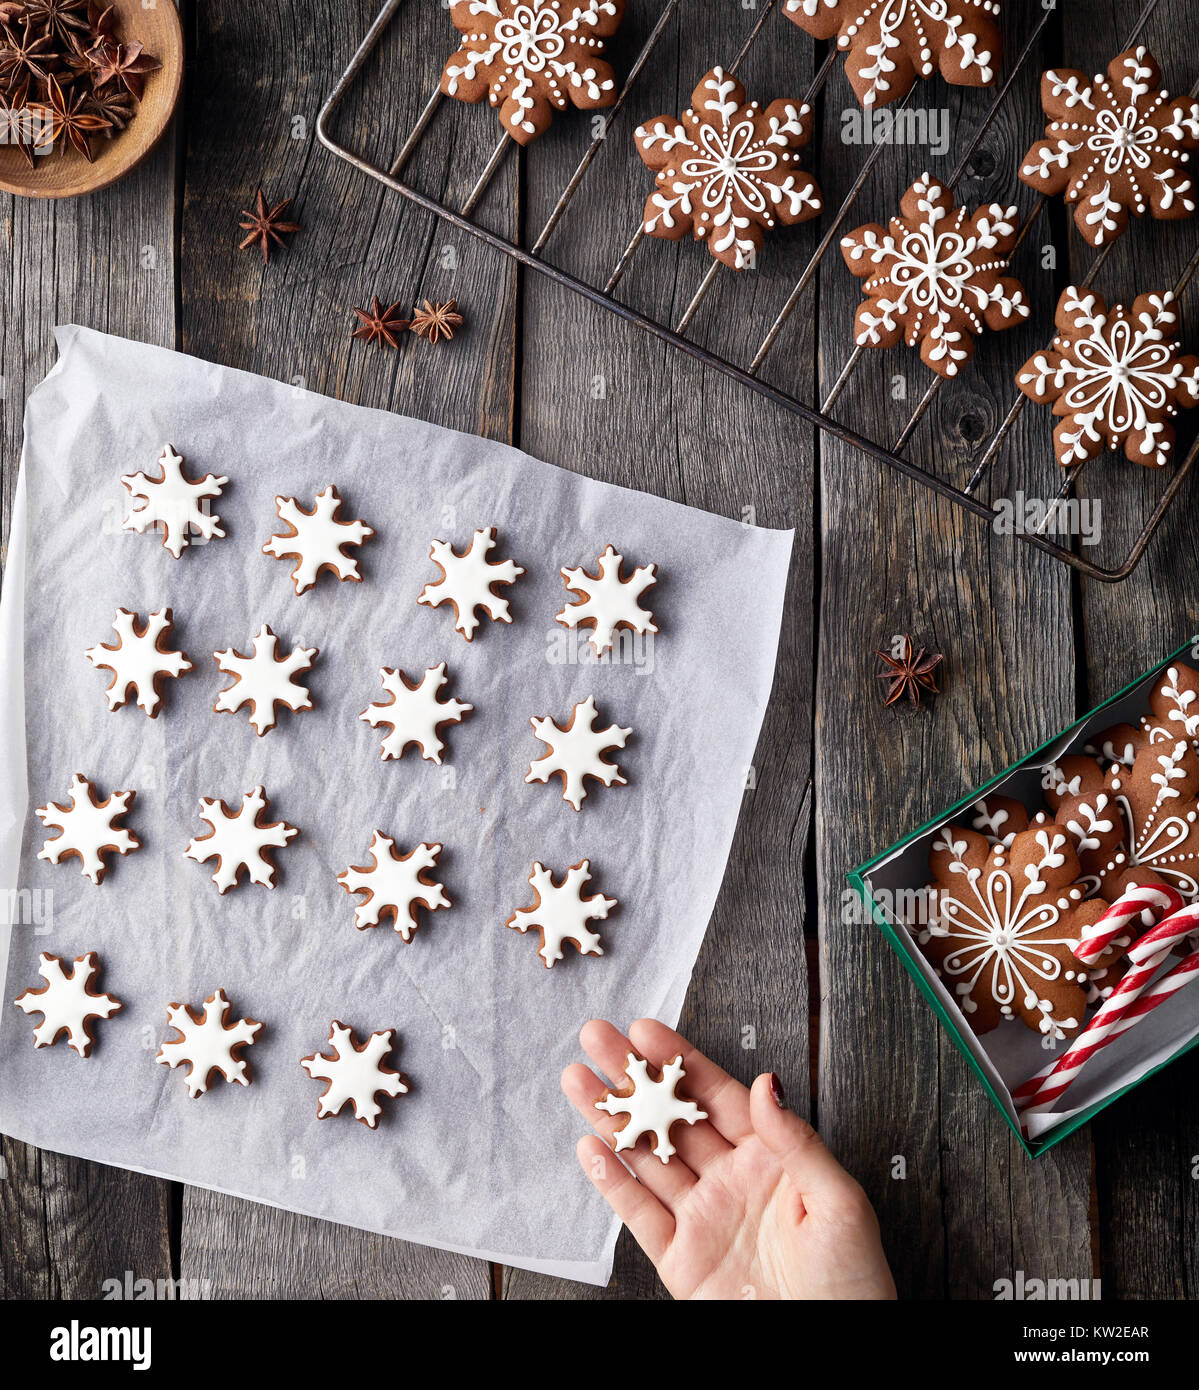 Woman cooking Christmas gingerbread stars on rustic wooden background Stock Photo